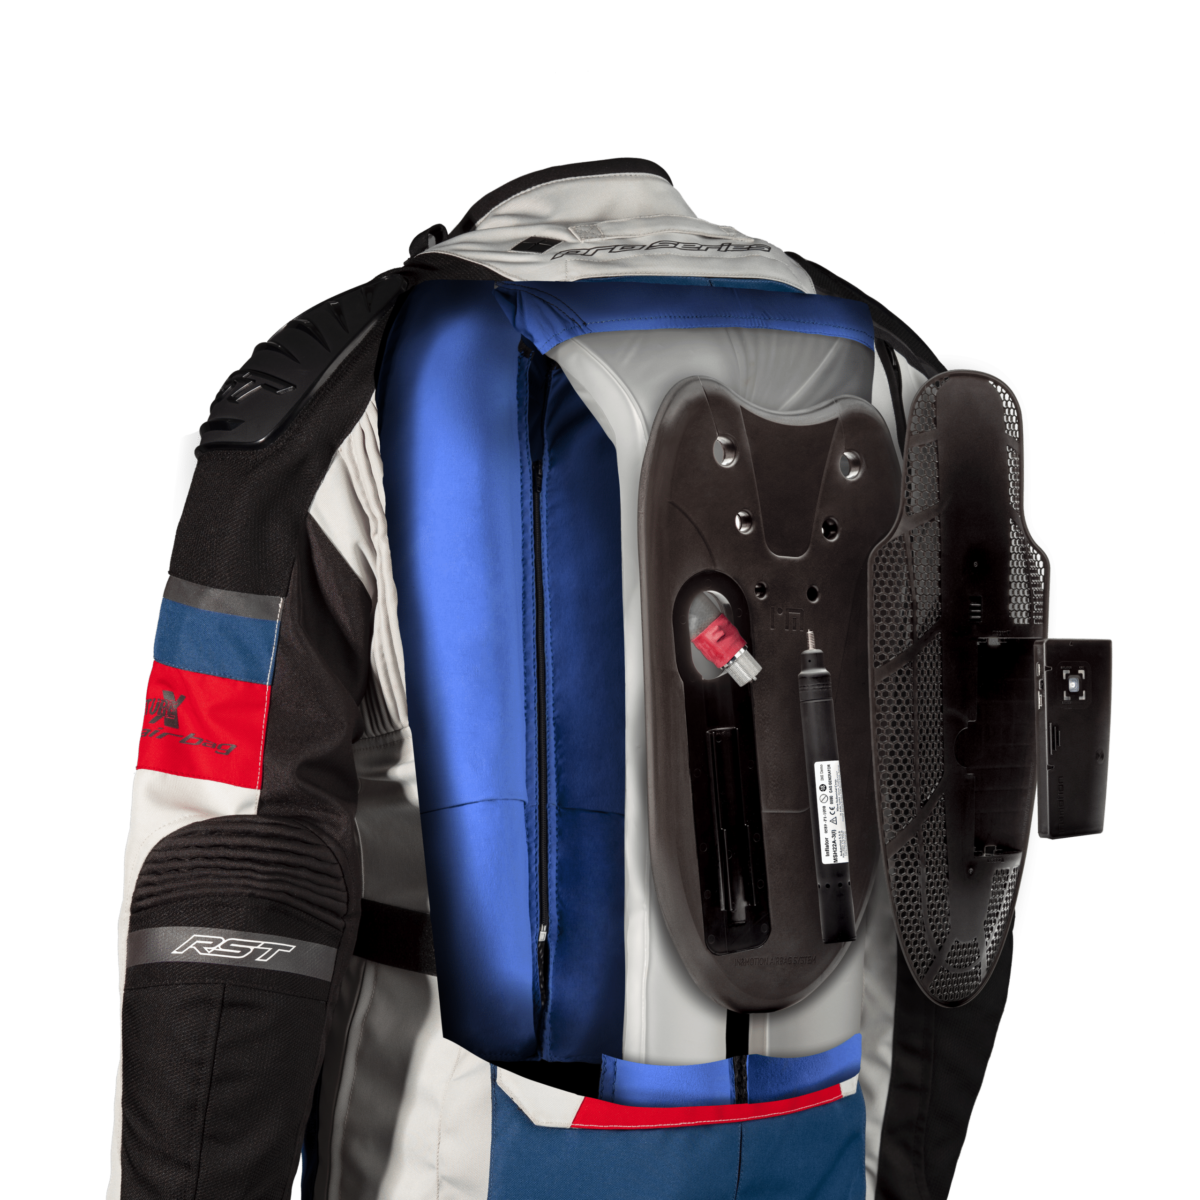 RST PRO SERIES ADVENTURE-X AIRBAG TEXTILE JACKET | In&motion